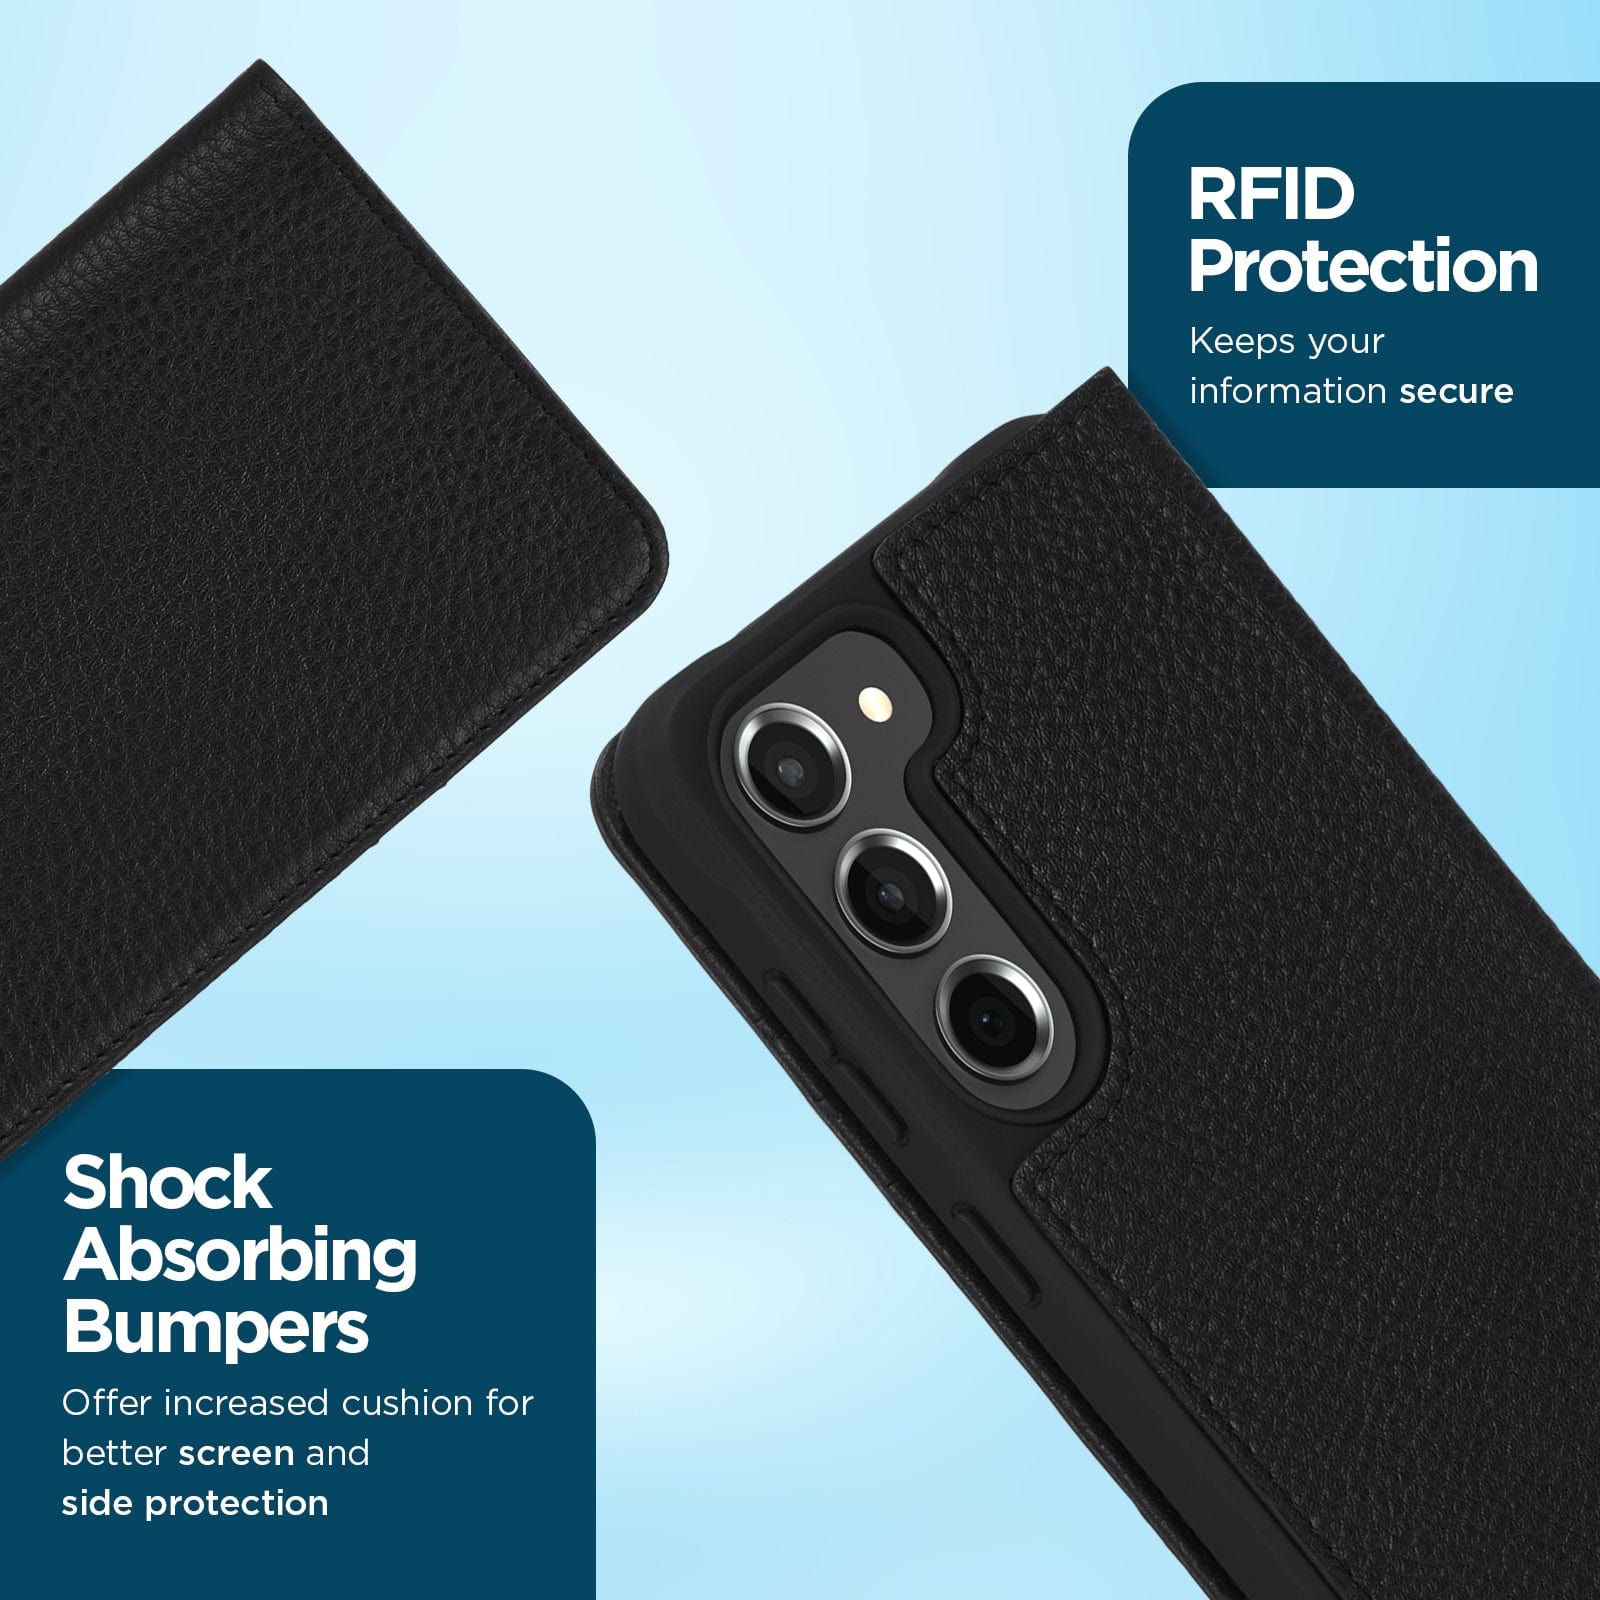 RFID PROTECTION KEEPS YOUR INFORMATION SECURE. SHOCK ABSORBING bumpers offer increased cushion for better screen and side protection. 